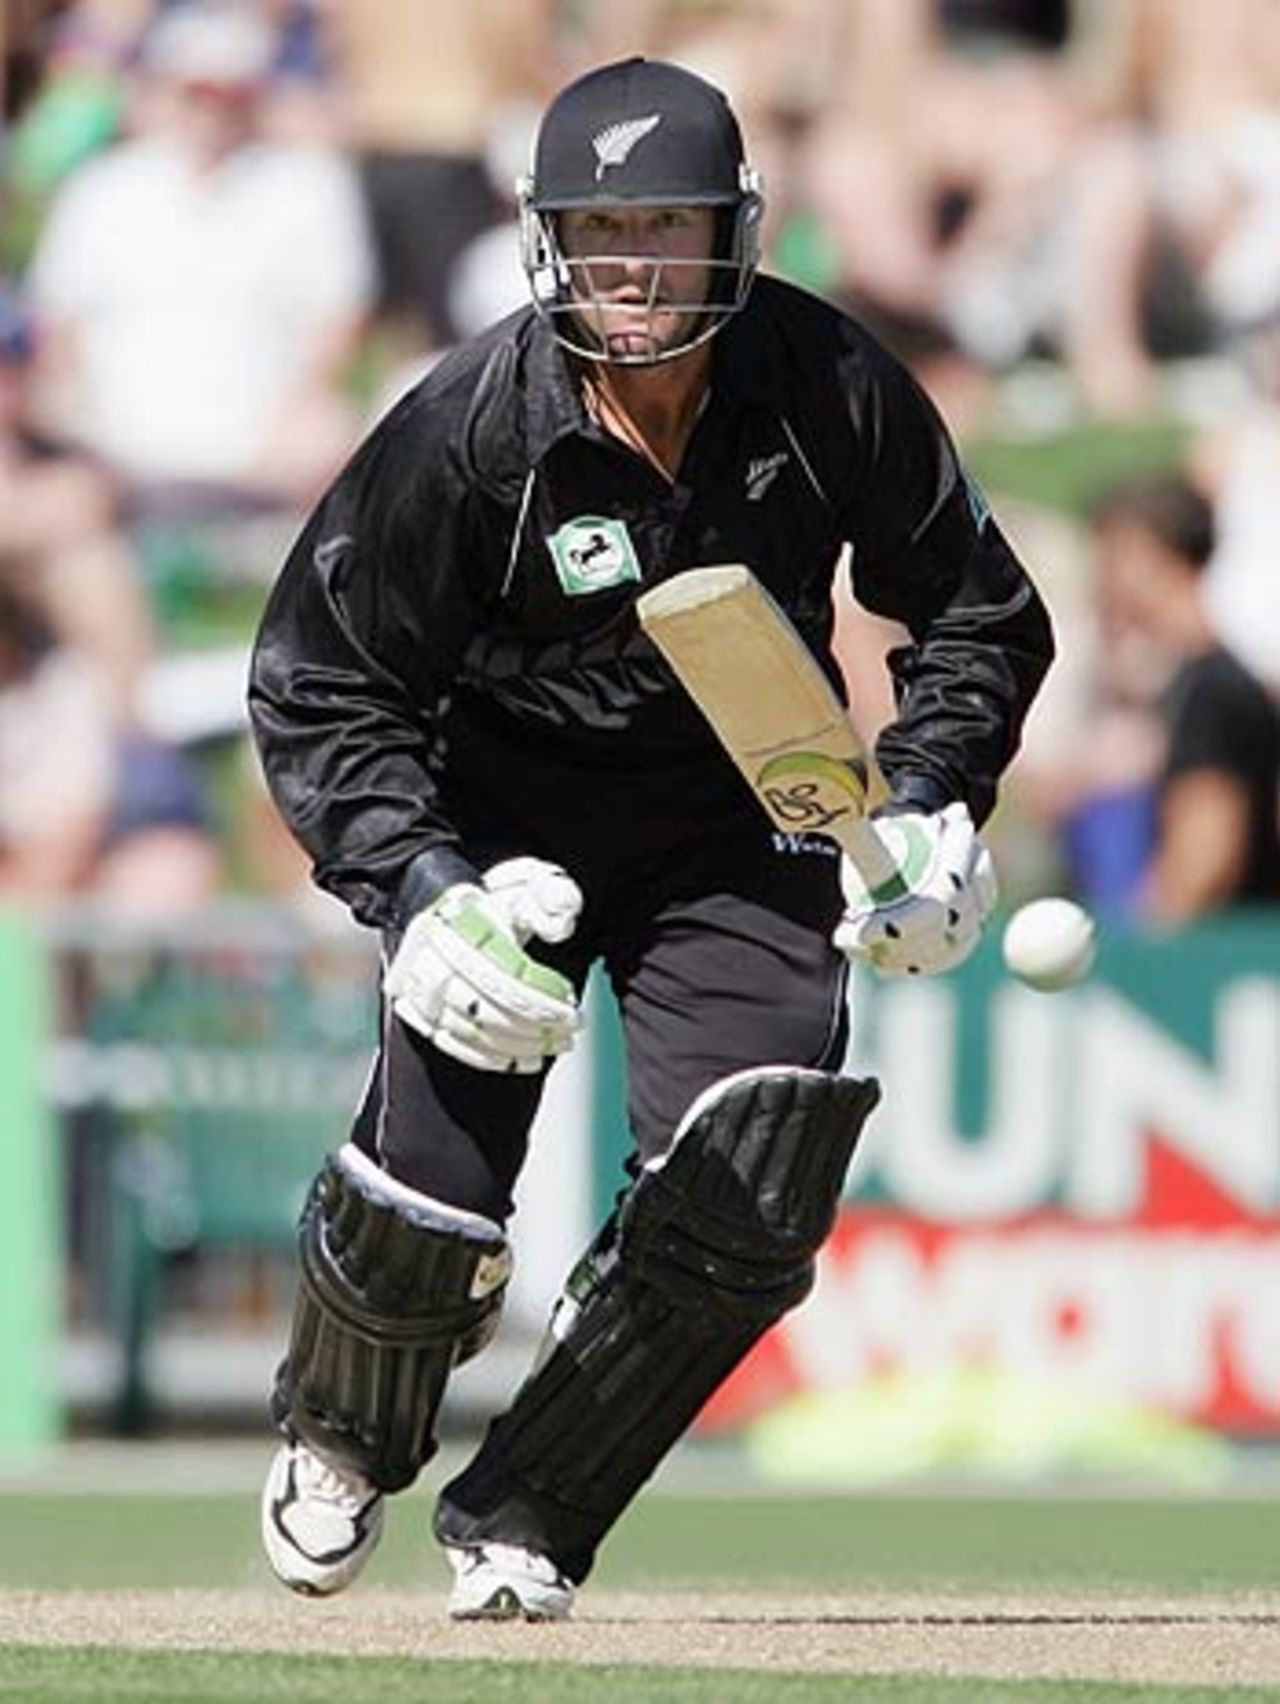 Nathan Astle helped consolidate New Zealand's innings after two early wickets, New Zealand v Sri Lanka, 5h ODI, Napier, January 8, 2006